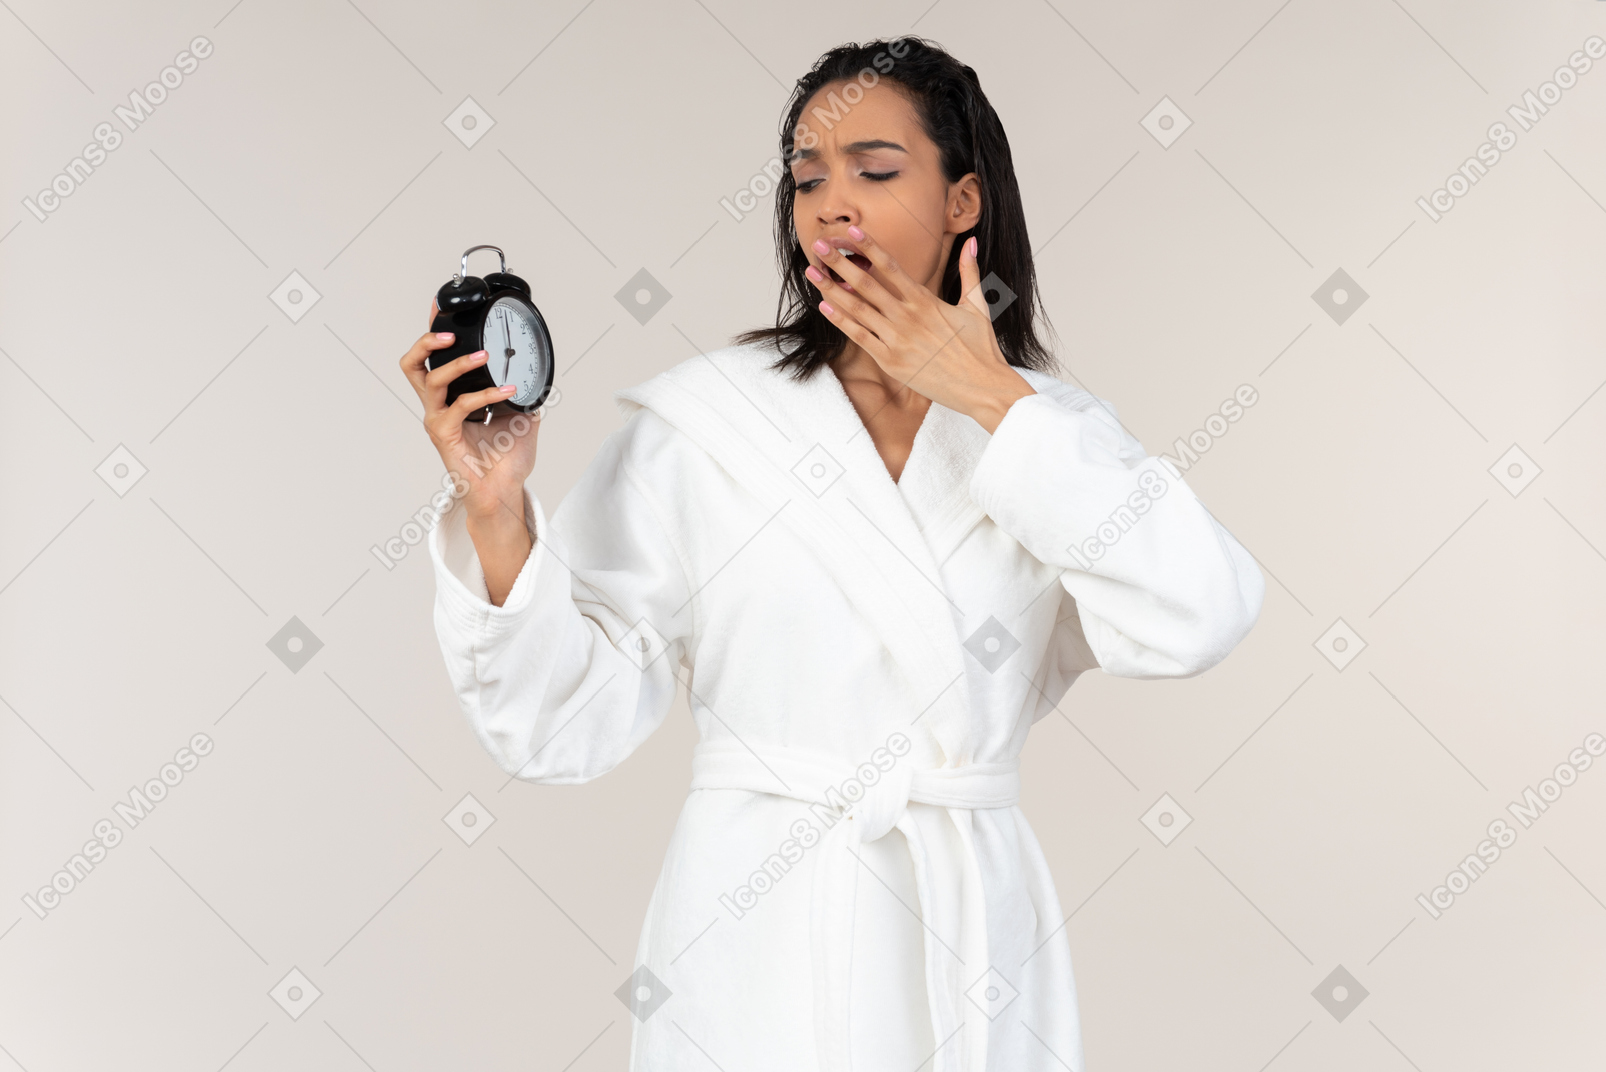 Black woman in white bathrobe going about her morning routine